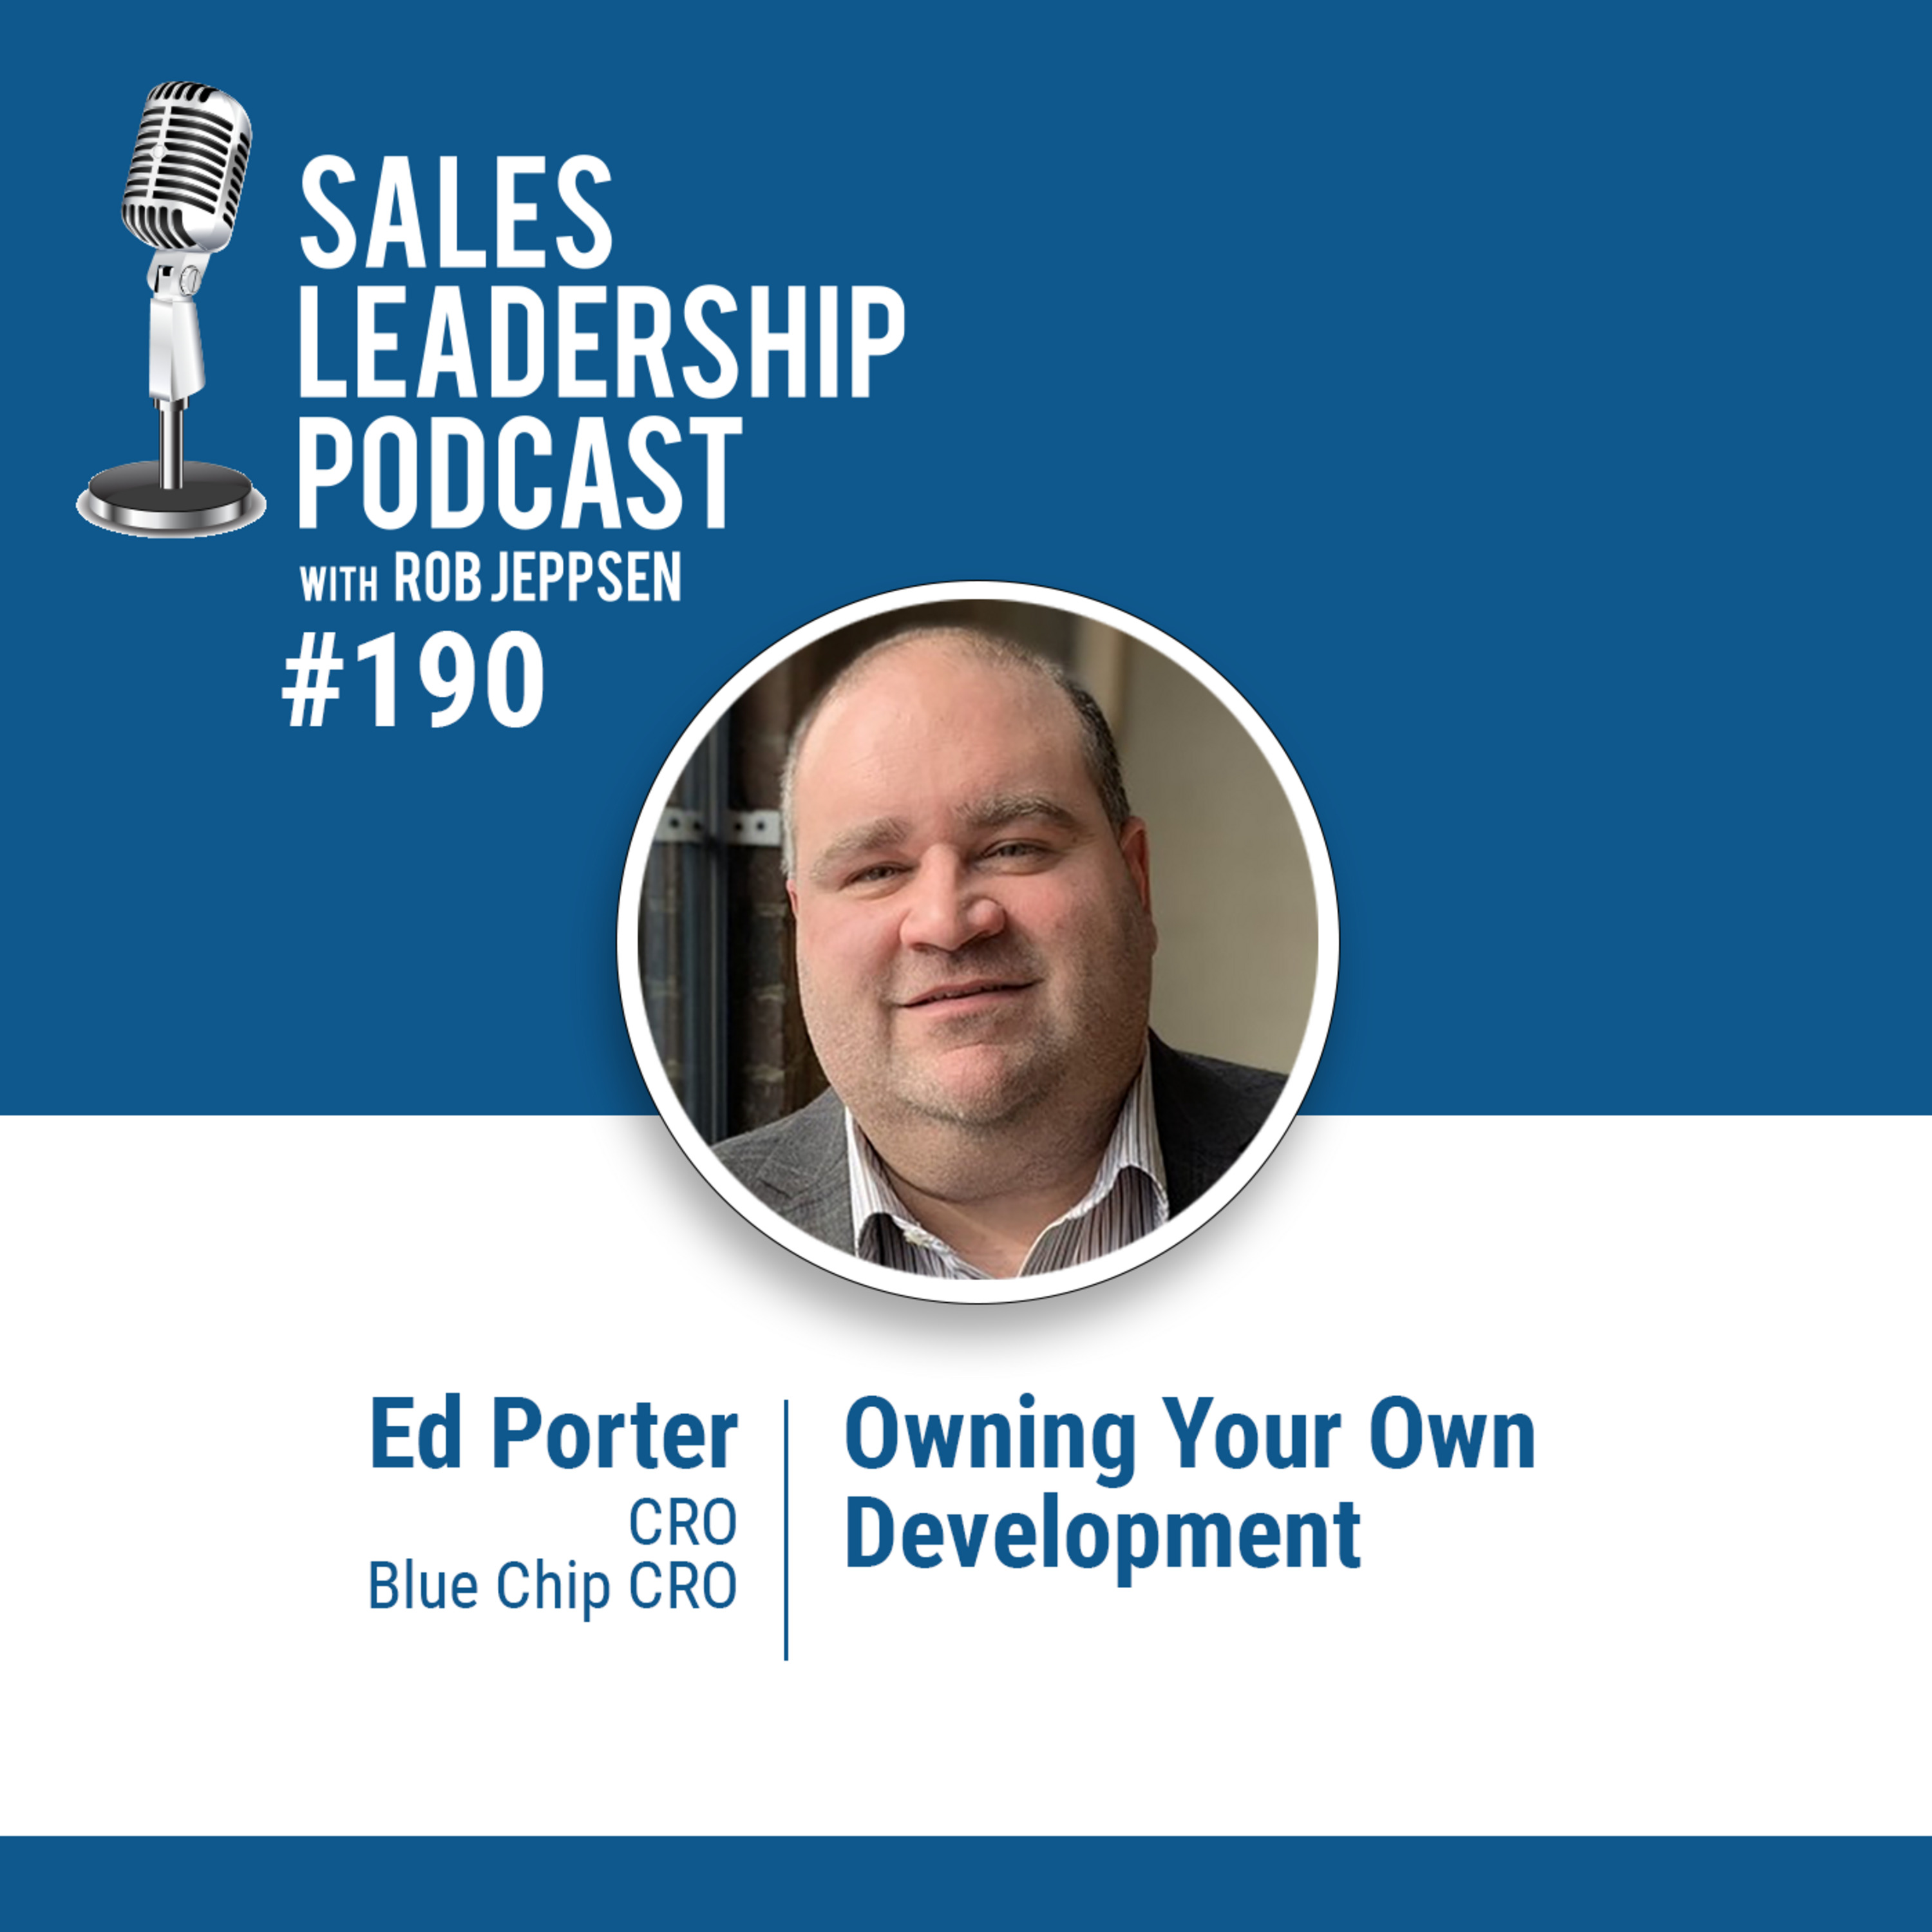 Episode 191: #190: Ed Porter of Blue Chip CRO — Owning Your Own Development